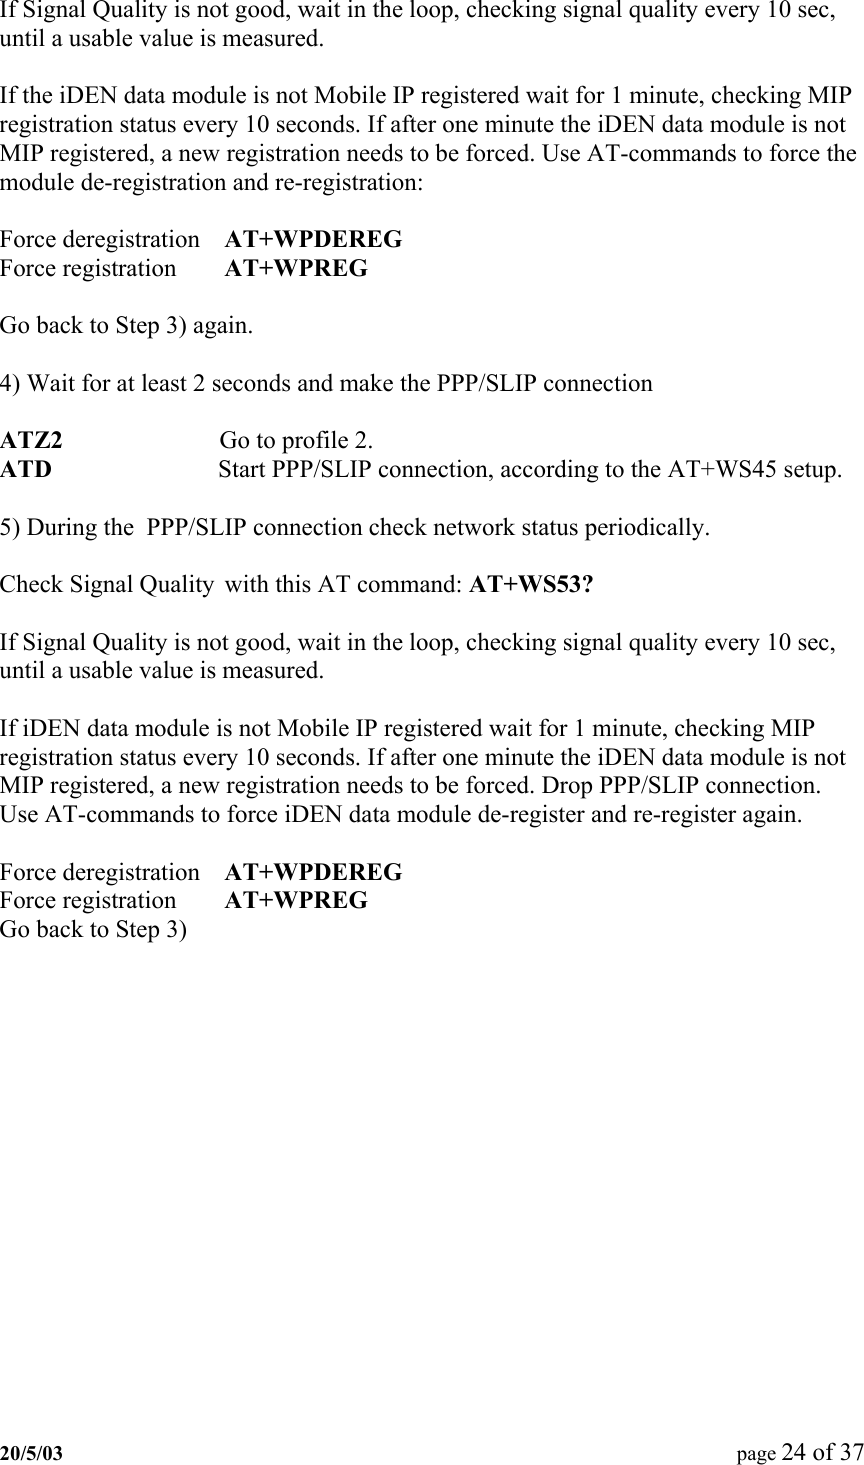  If Signal Quality is not good, wait in the loop, checking signal quality every 10 sec, until a usable value is measured.  If the iDEN data module is not Mobile IP registered wait for 1 minute, checking MIP registration status every 10 seconds. If after one minute the iDEN data module is not MIP registered, a new registration needs to be forced. Use AT-commands to force the module de-registration and re-registration:  Force deregistration  AT+WPDEREG Force registration  AT+WPREG  Go back to Step 3) again.  4) Wait for at least 2 seconds and make the PPP/SLIP connection  ATZ2                         Go to profile 2. ATD                         Start PPP/SLIP connection, according to the AT+WS45 setup.  5) During the  PPP/SLIP connection check network status periodically.  Check Signal Quality  with this AT command: AT+WS53?   If Signal Quality is not good, wait in the loop, checking signal quality every 10 sec, until a usable value is measured.  If iDEN data module is not Mobile IP registered wait for 1 minute, checking MIP registration status every 10 seconds. If after one minute the iDEN data module is not MIP registered, a new registration needs to be forced. Drop PPP/SLIP connection. Use AT-commands to force iDEN data module de-register and re-register again.  Force deregistration  AT+WPDEREG Force registration  AT+WPREG Go back to Step 3) 20/5/03  page 24 of 37   